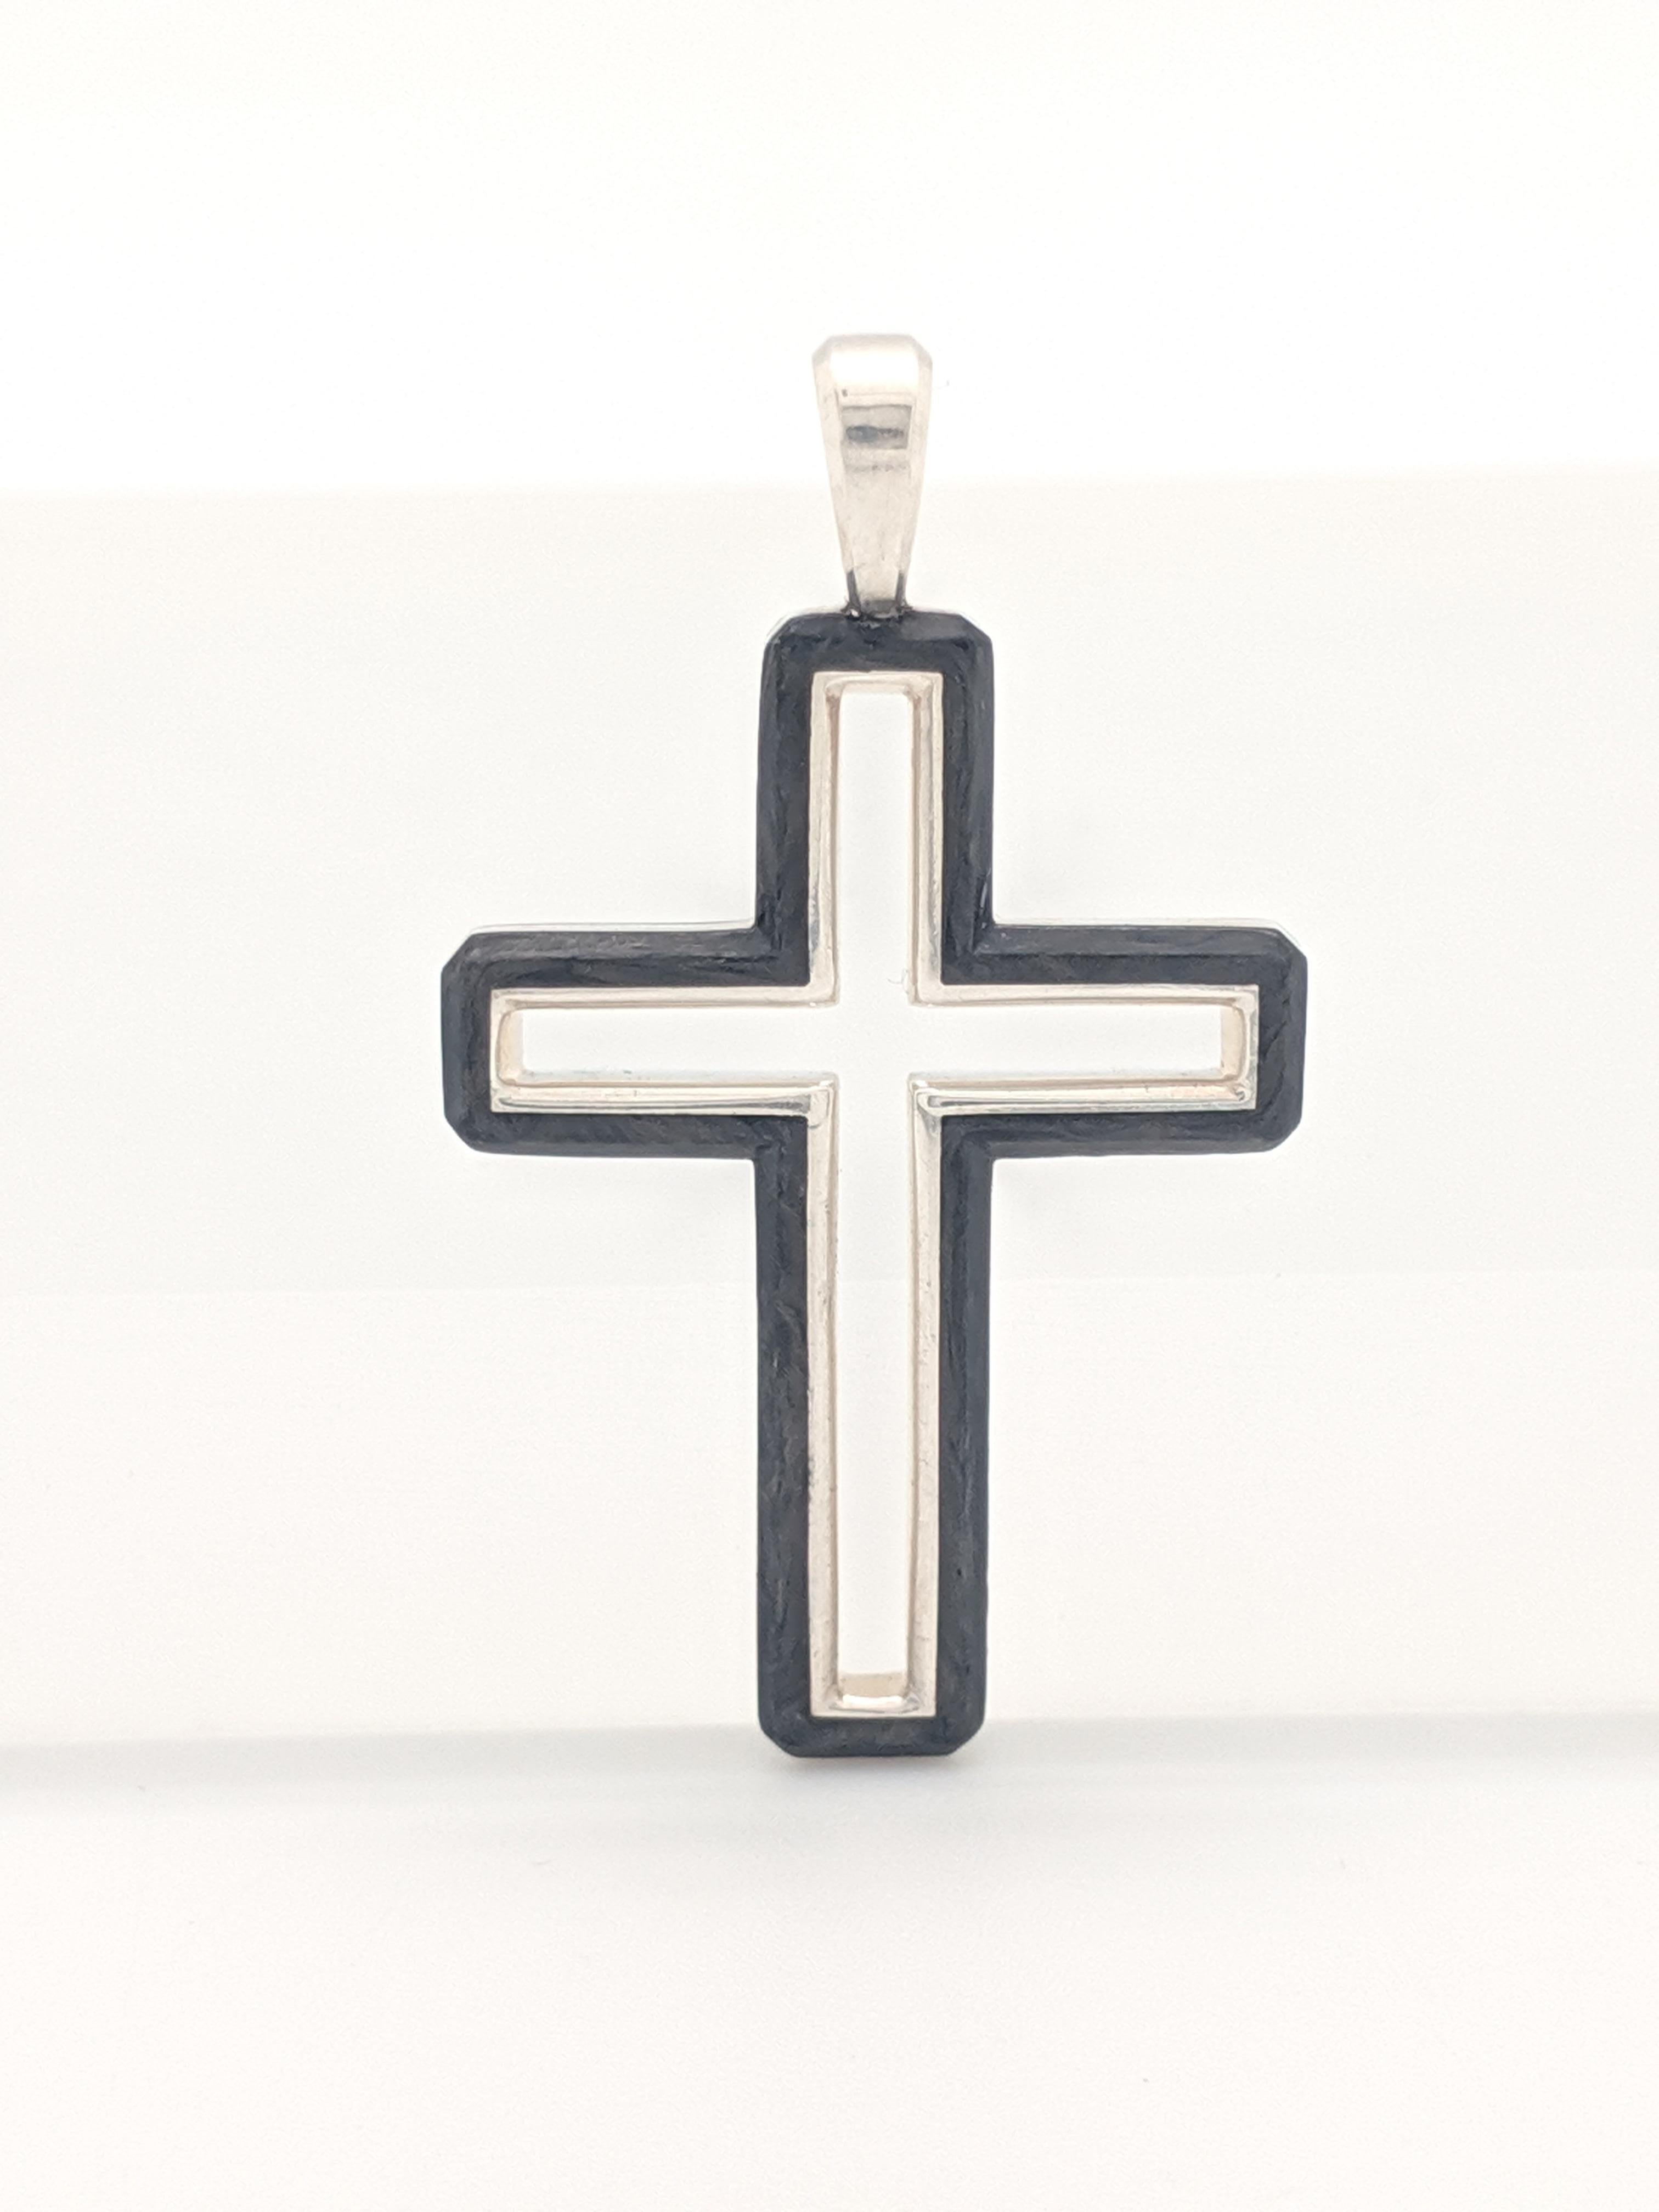 Contemporary NWOT David Yurman Forged Carbon Cross Pendant For Sale